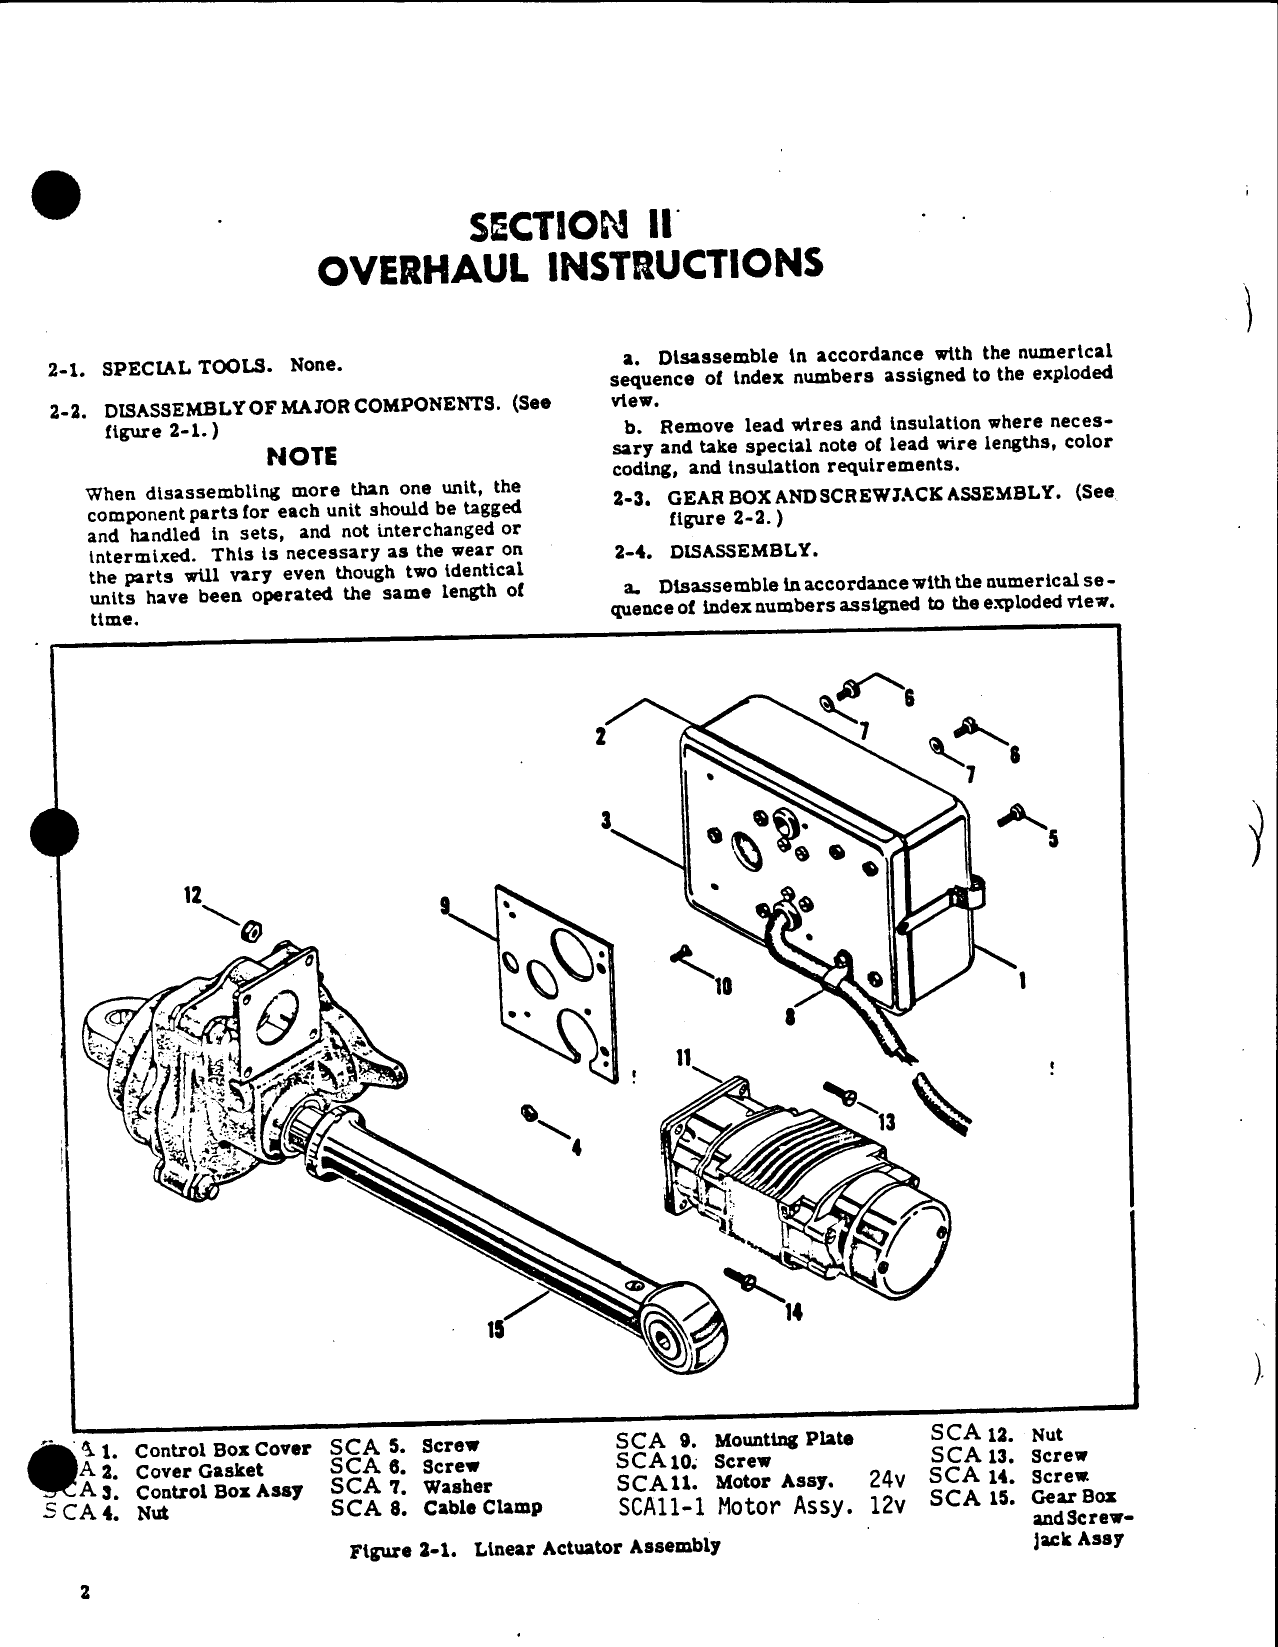 Sample page 3 from AirCorps Library document: Overhaul Inst. with Illustrated Parts Catalog for Actuator 1-2157-1M1 and 4859